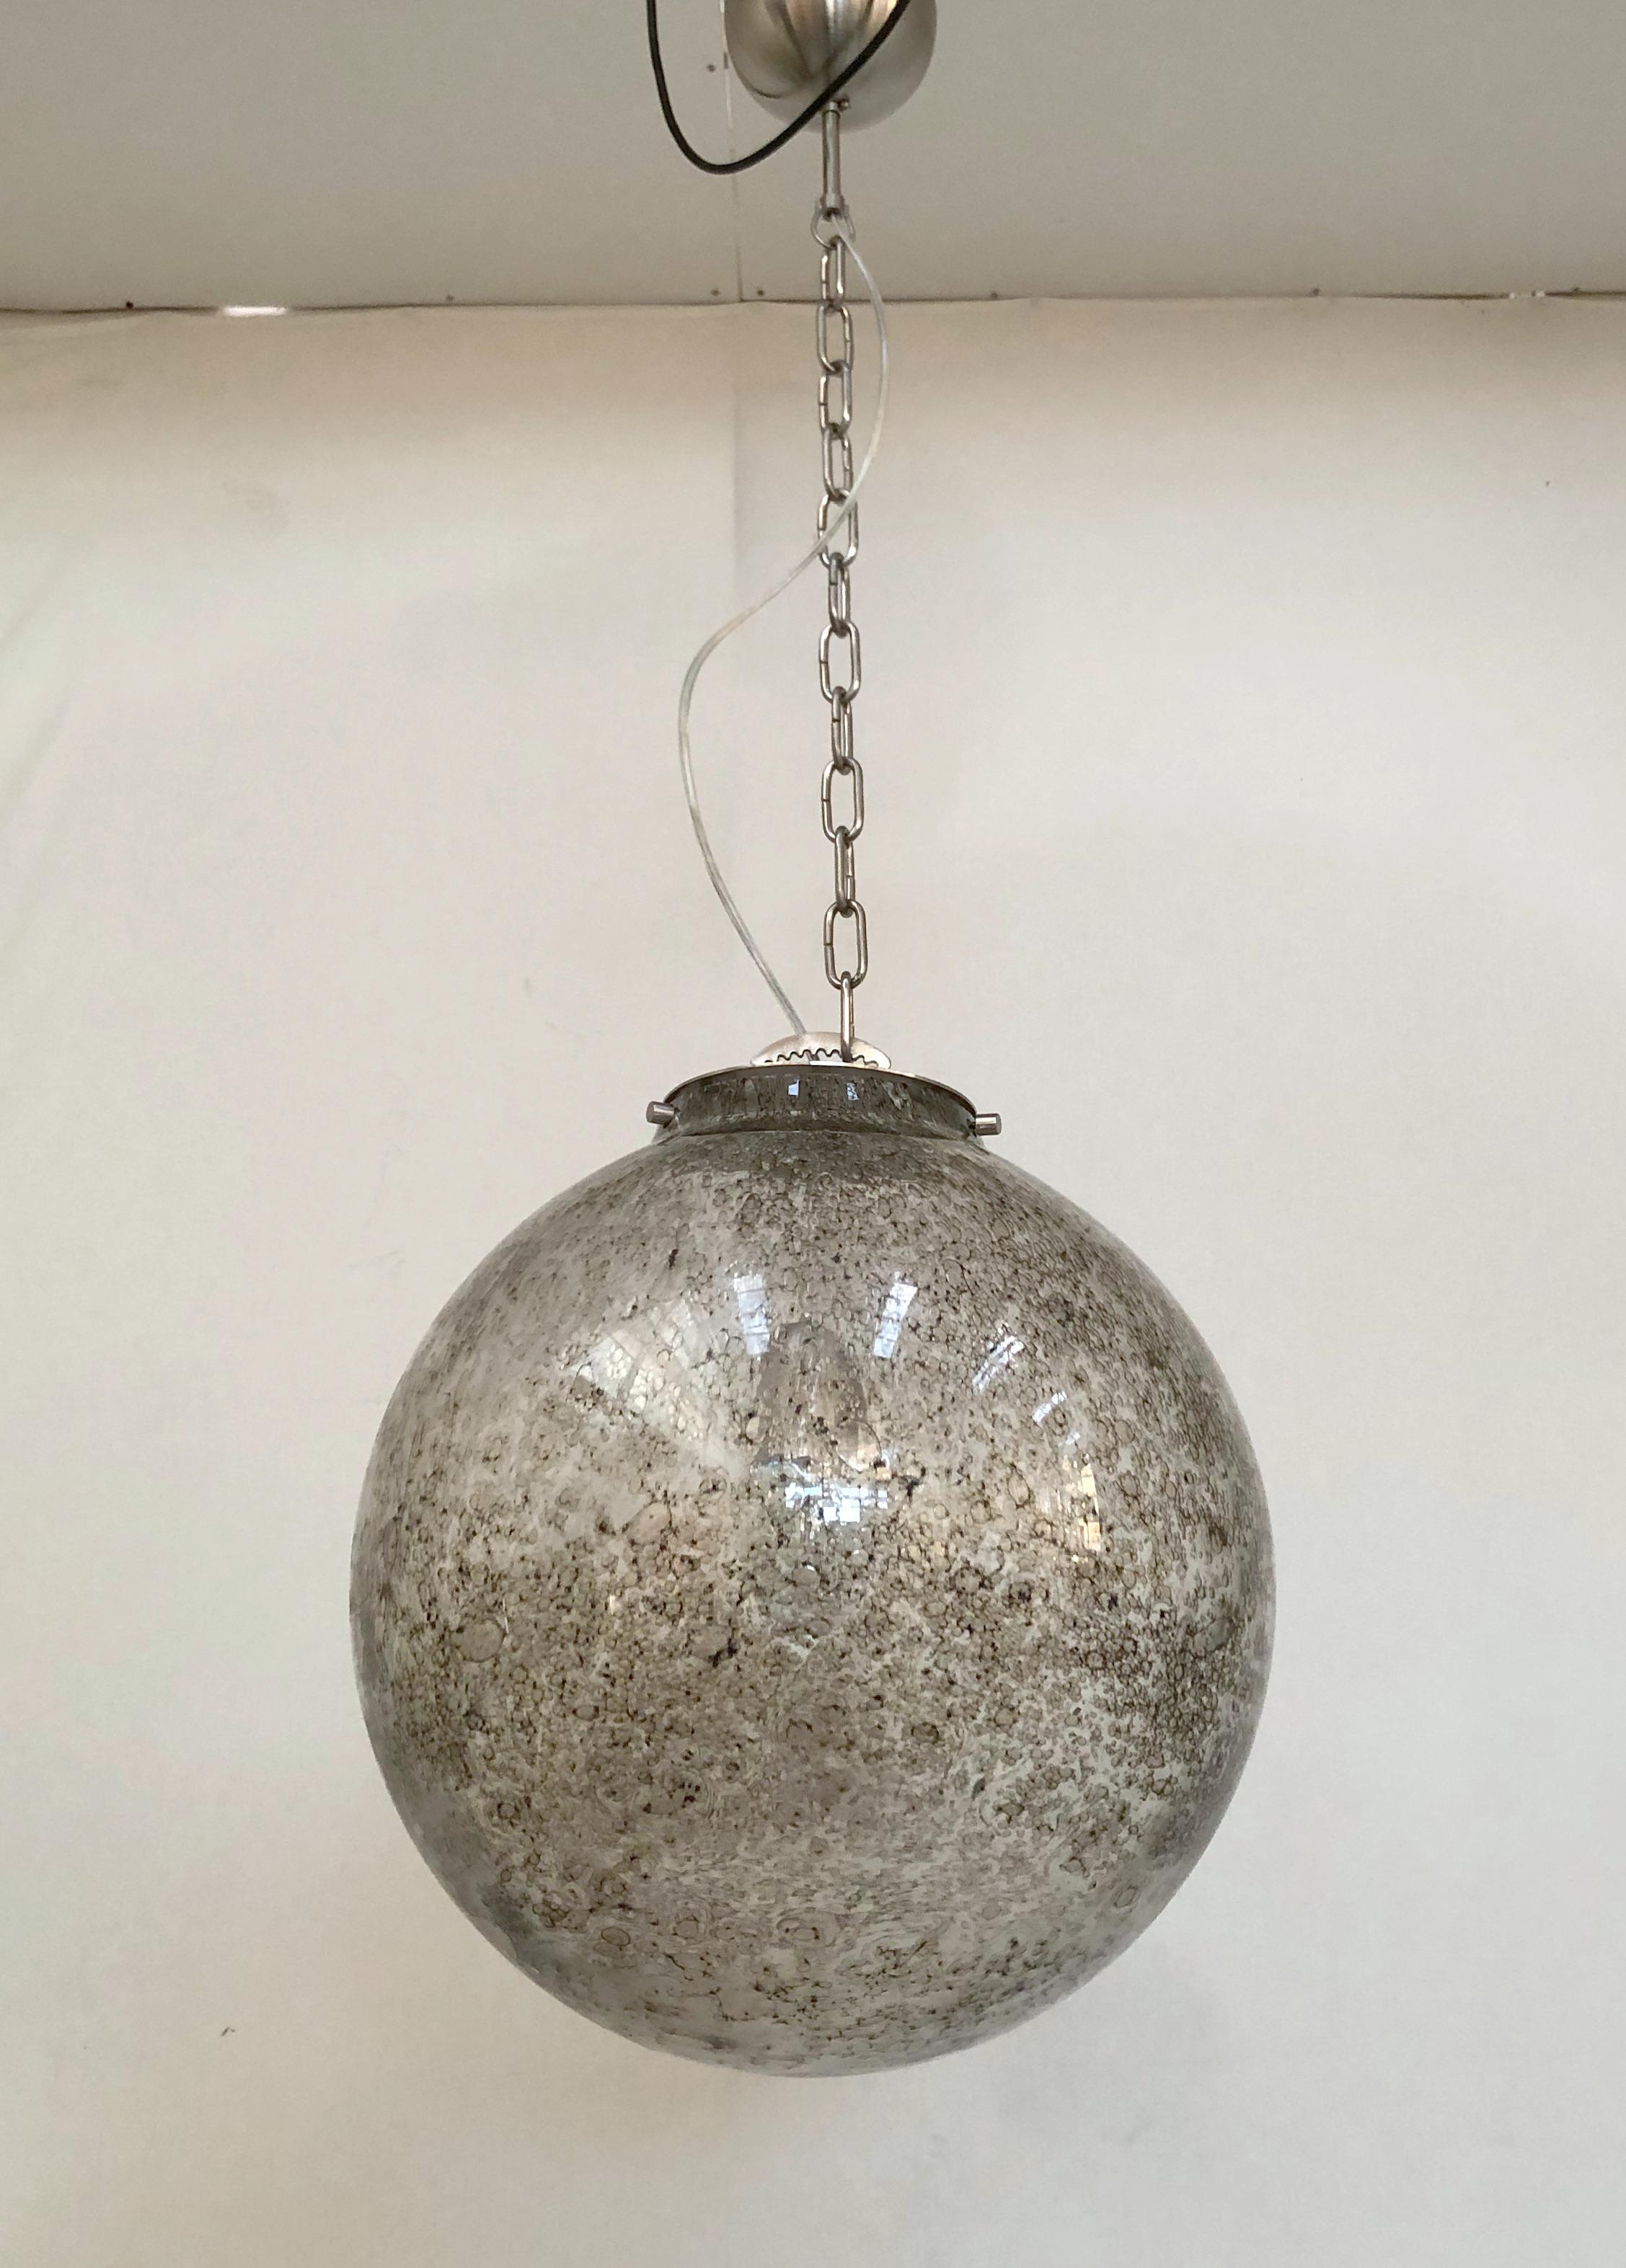 Italian pendant with a smoky Murano glass globe, carefully hand blown with bubbles within the glass using Bollicine technique, suspended from satin nickel metal chain and canopy, made in Italy
Measures: Diameter 20 inches, height 20 inches plus